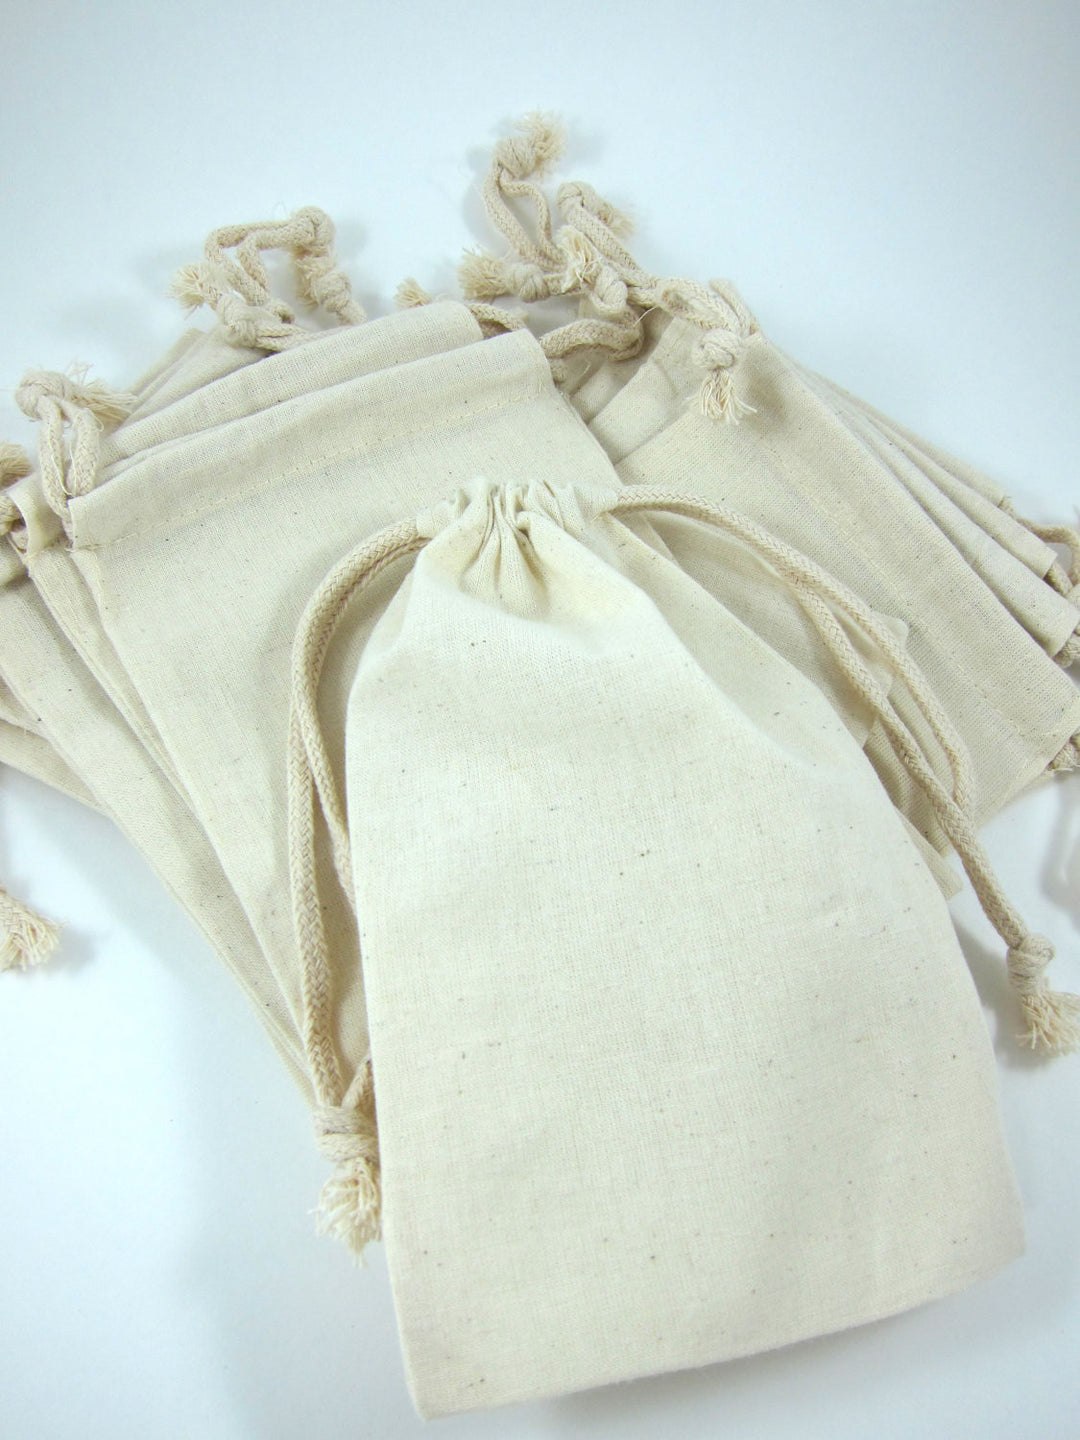  Cotton Drawstring Muslin Bags, 3 X 5 - Pack of 25: Home &  Kitchen